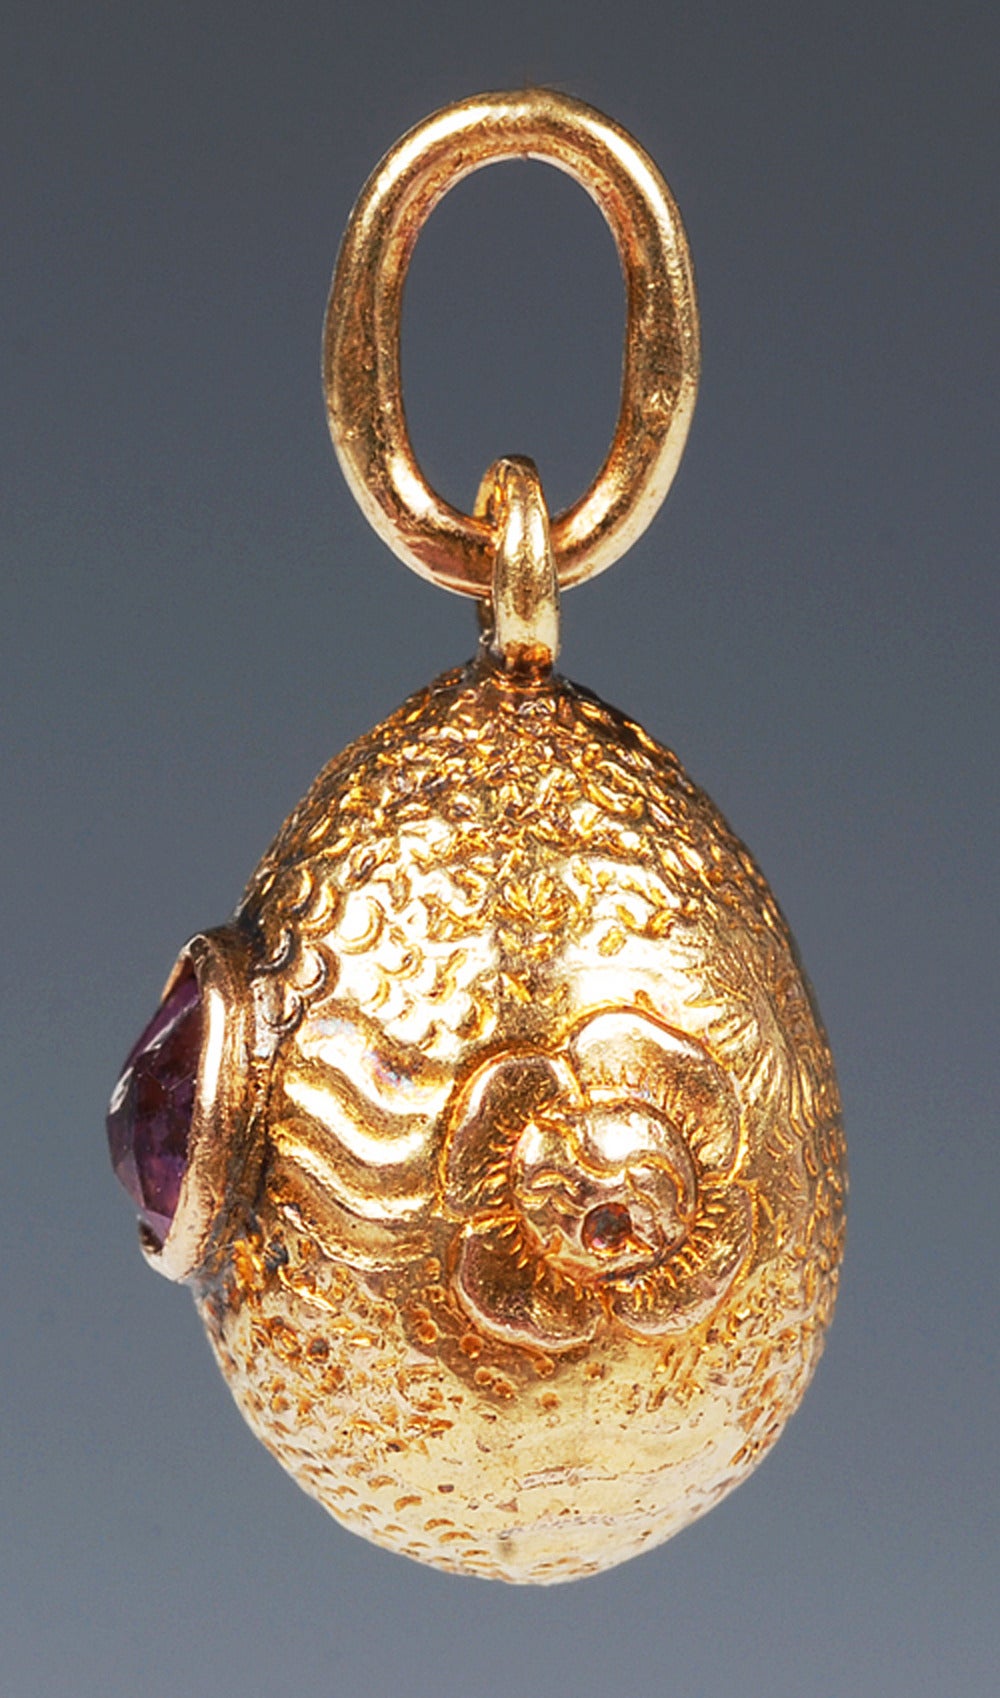 A Russian gold pendant egg set with an amethyst, maker's mark unclear, circa 1900. The repousse and textured body also decorated with raised gold flower heads. Height: 3/4